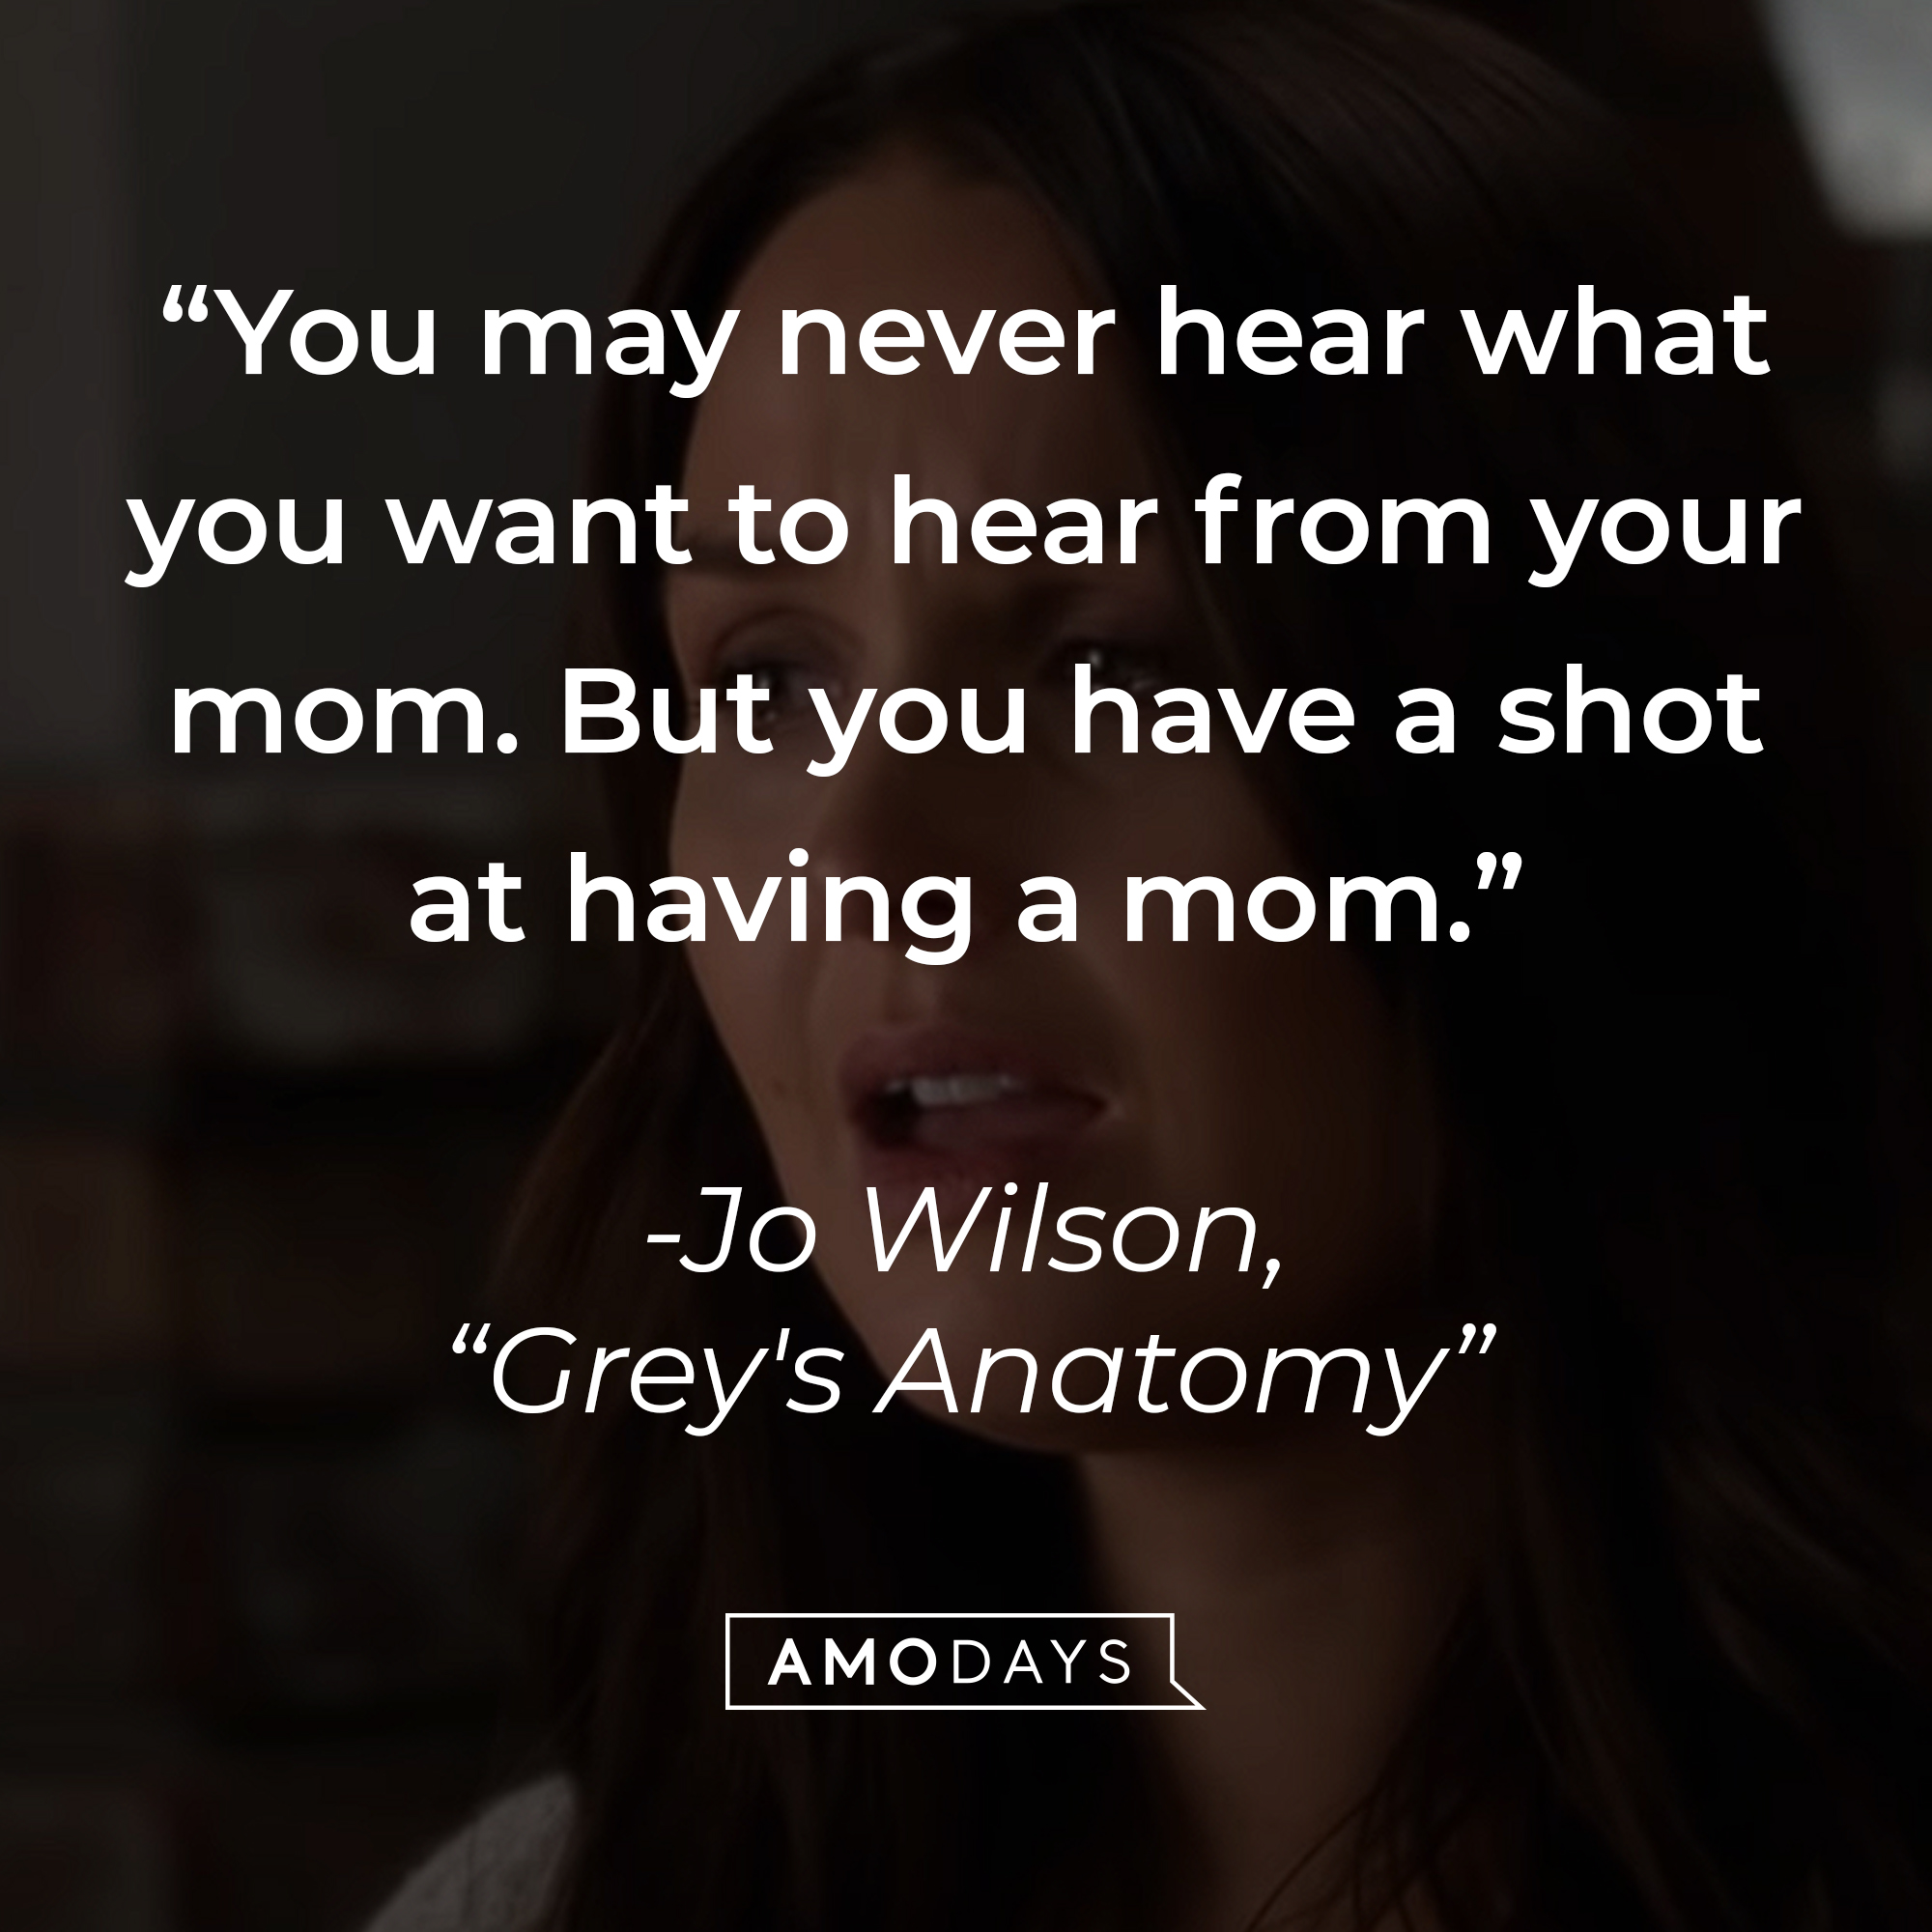 Jo Wilson’s quote from “Grey’s Anatomy”: “You may never hear what you want to hear from your mom. But you have a shot at having a mom.” | Source: youtube.com/ABCNetwork